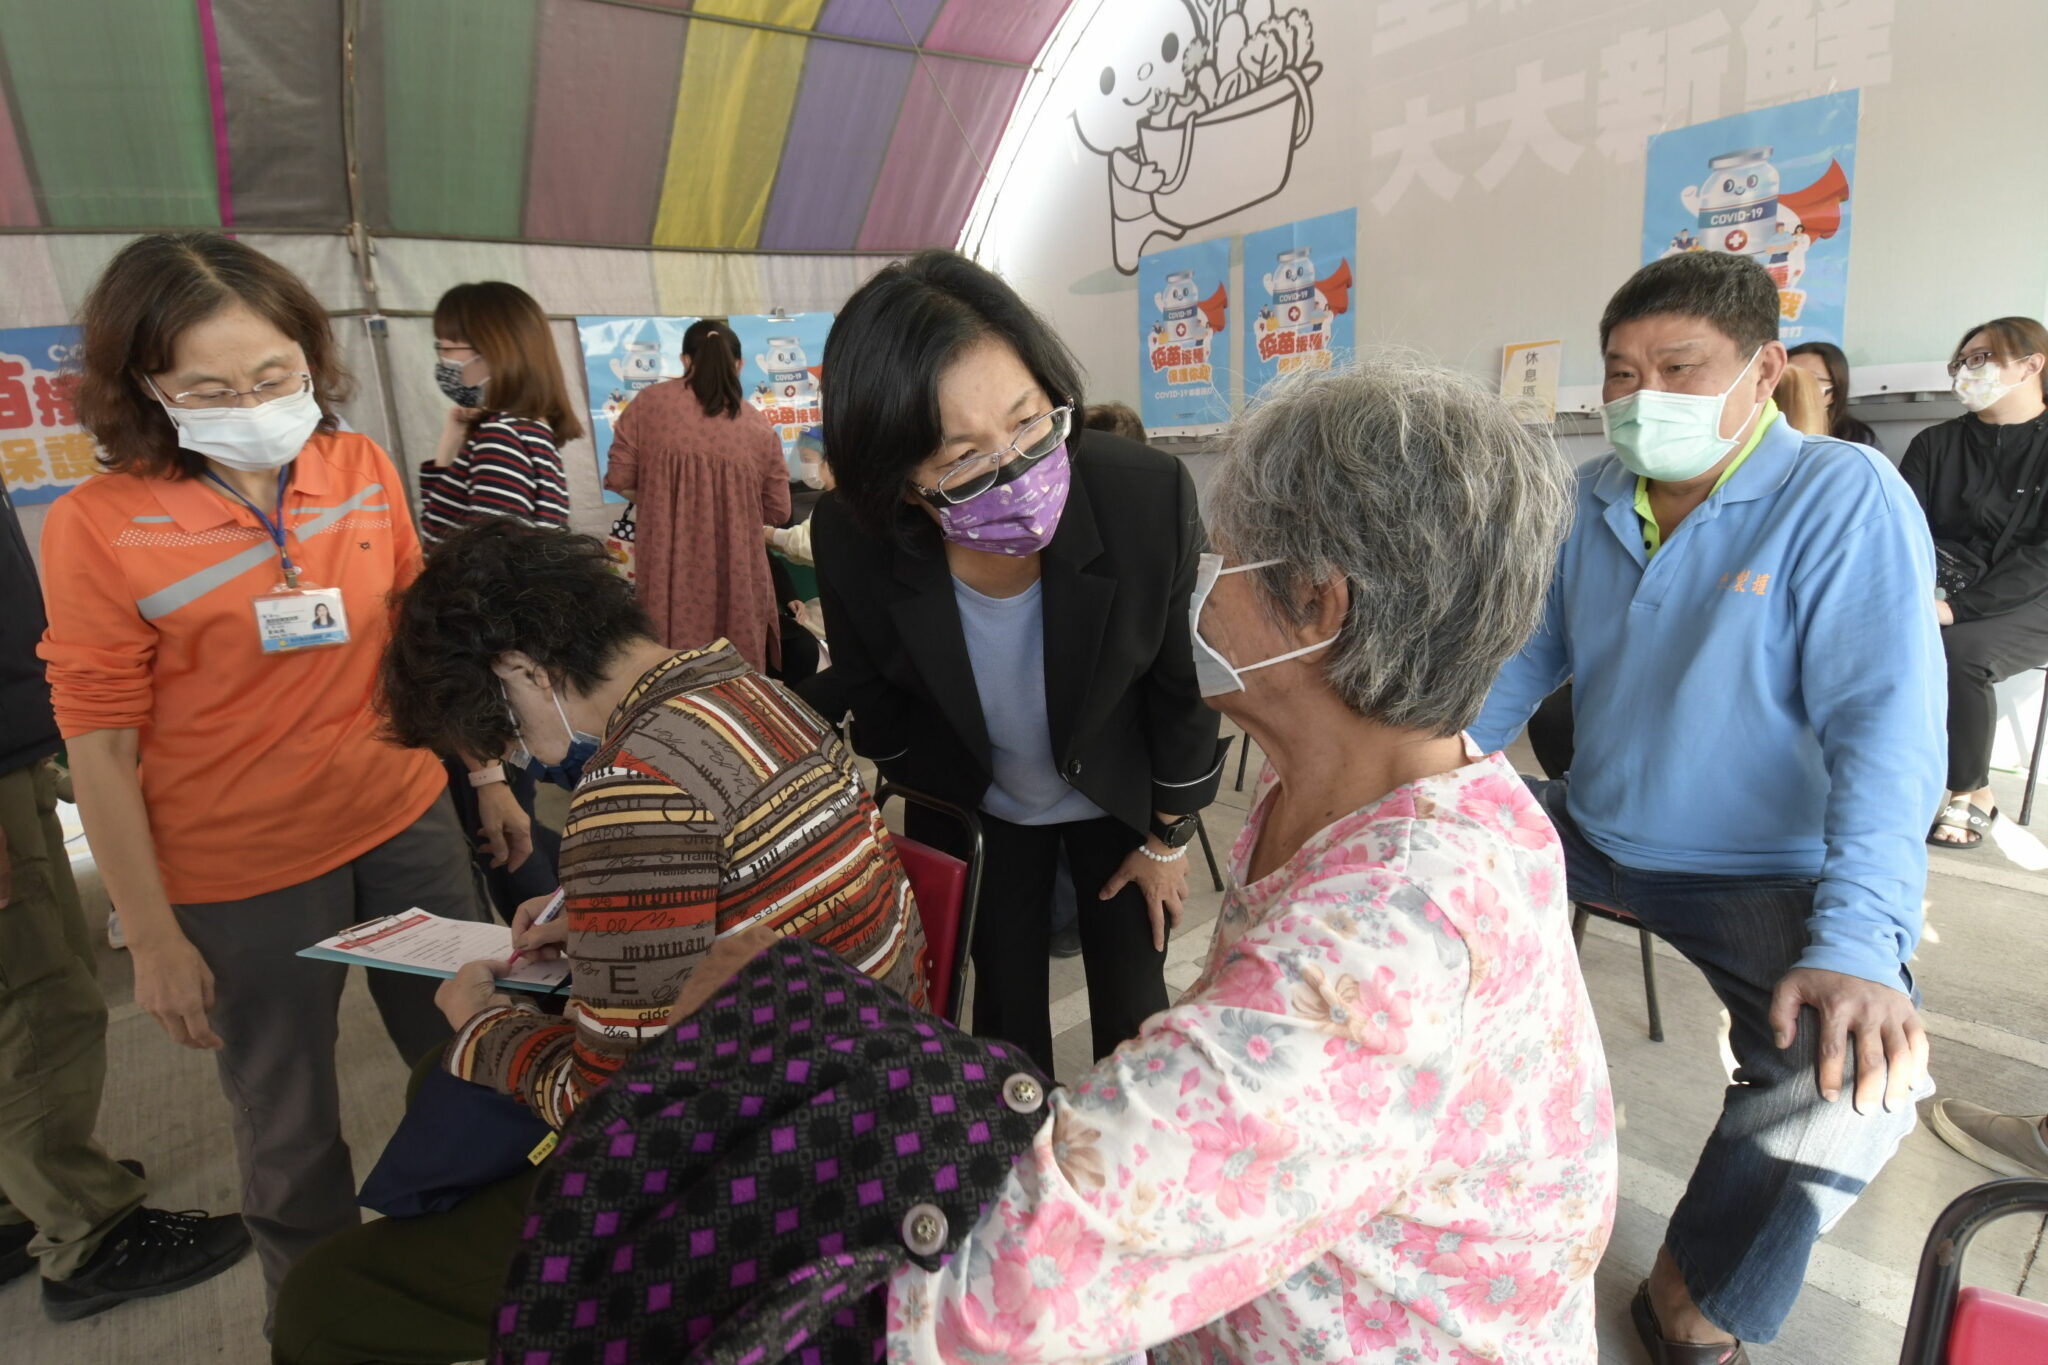 Changhua County Public Health Bureau encourages foreigners to get vaccinated. (Photo / Provided by Changhua County Public Health Bureau)